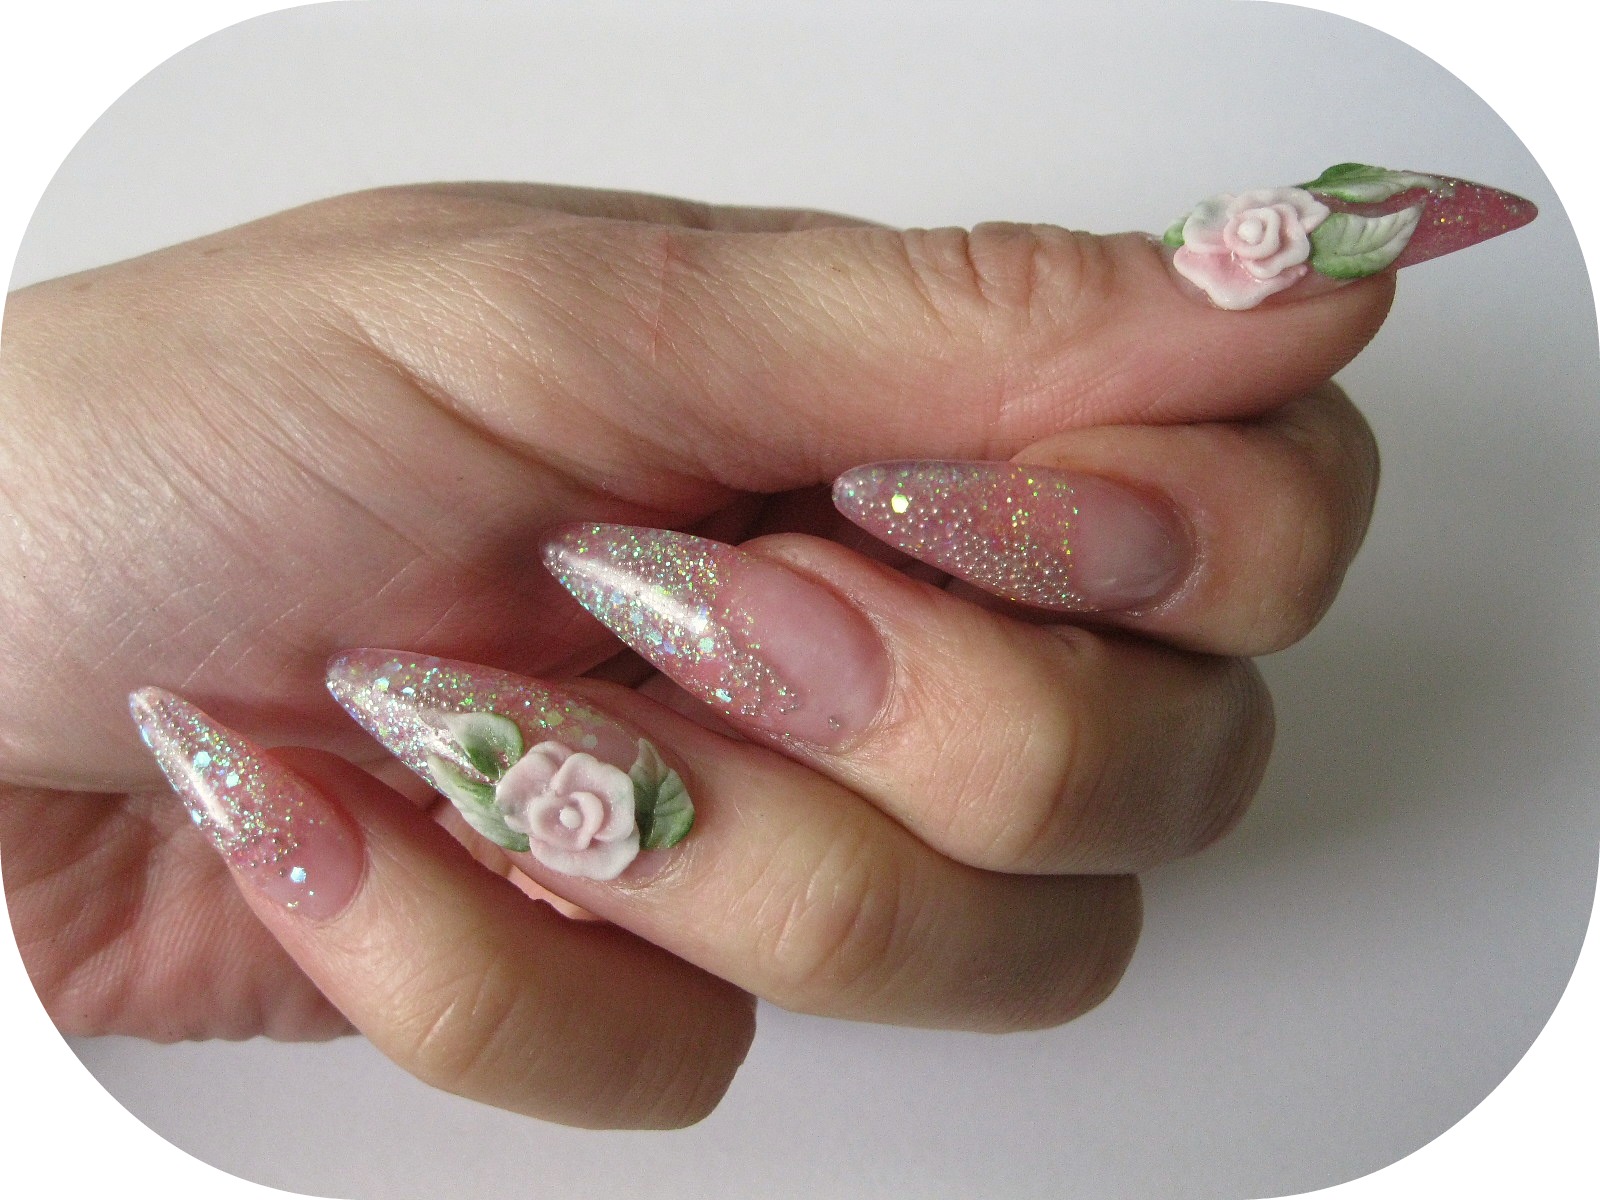 ...Make It With Me: Stiletto Nails with 3D Roses and Glitter